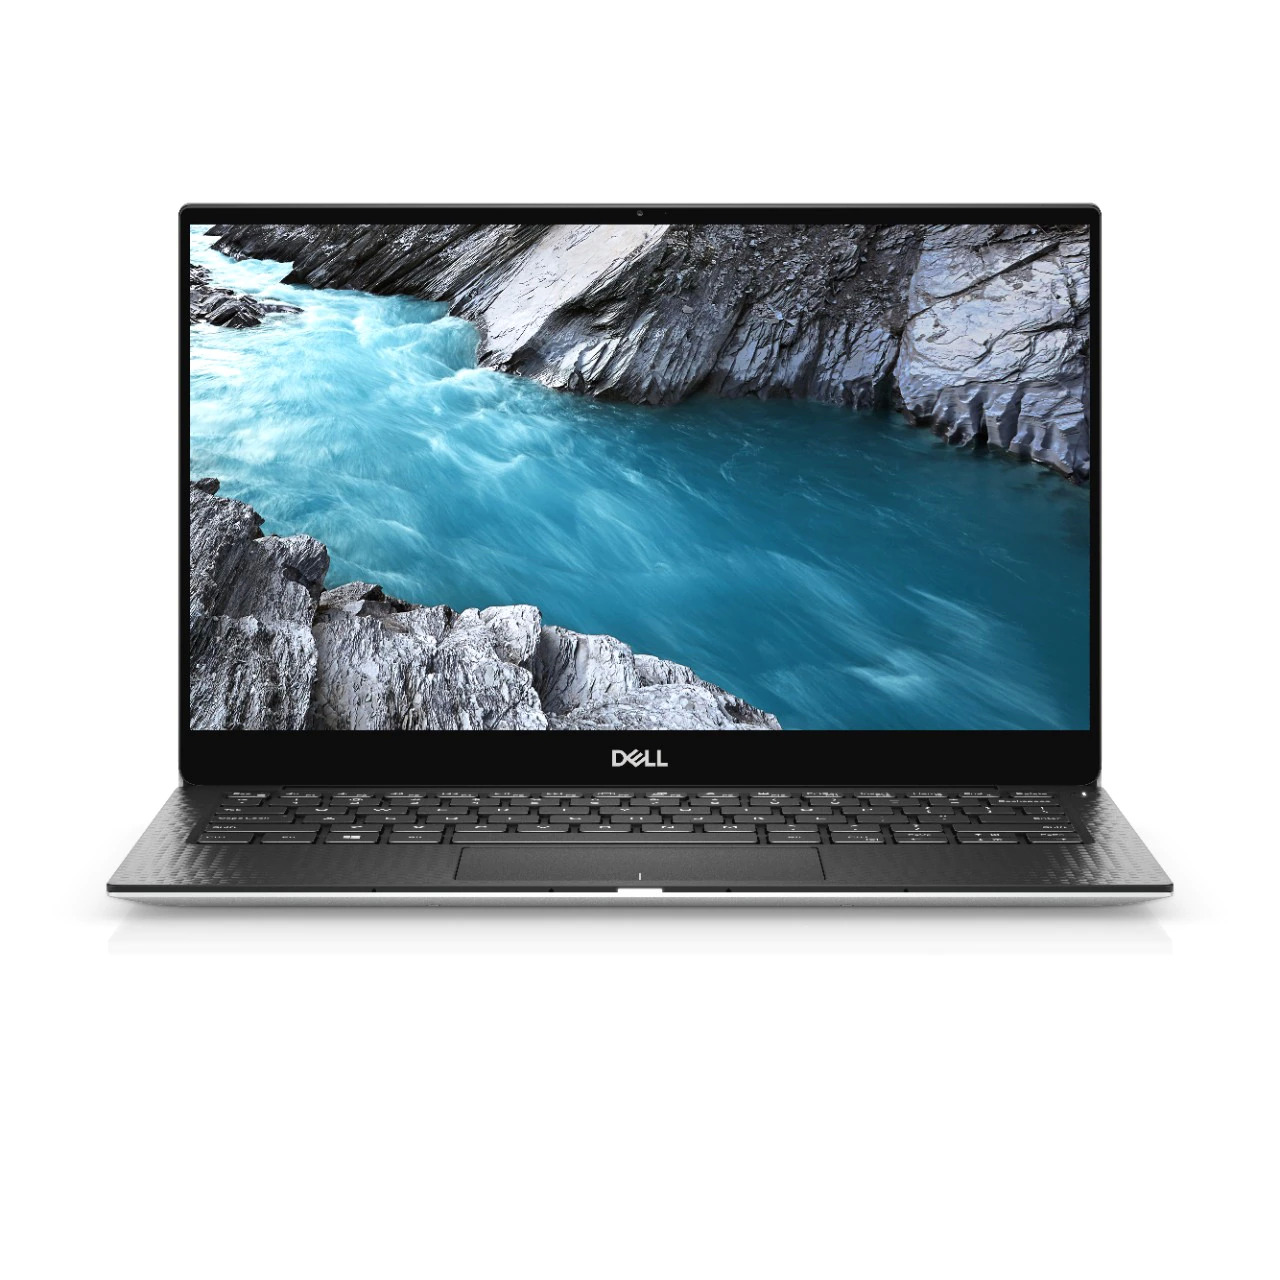 (Refurbished) Dell XPS 13 9305 Laptop: i7-1165G7, 16GB RAM, 512GB SSD, 13.3" FHD Touch Screen, Thunderbolt 4 $624 w/ Code